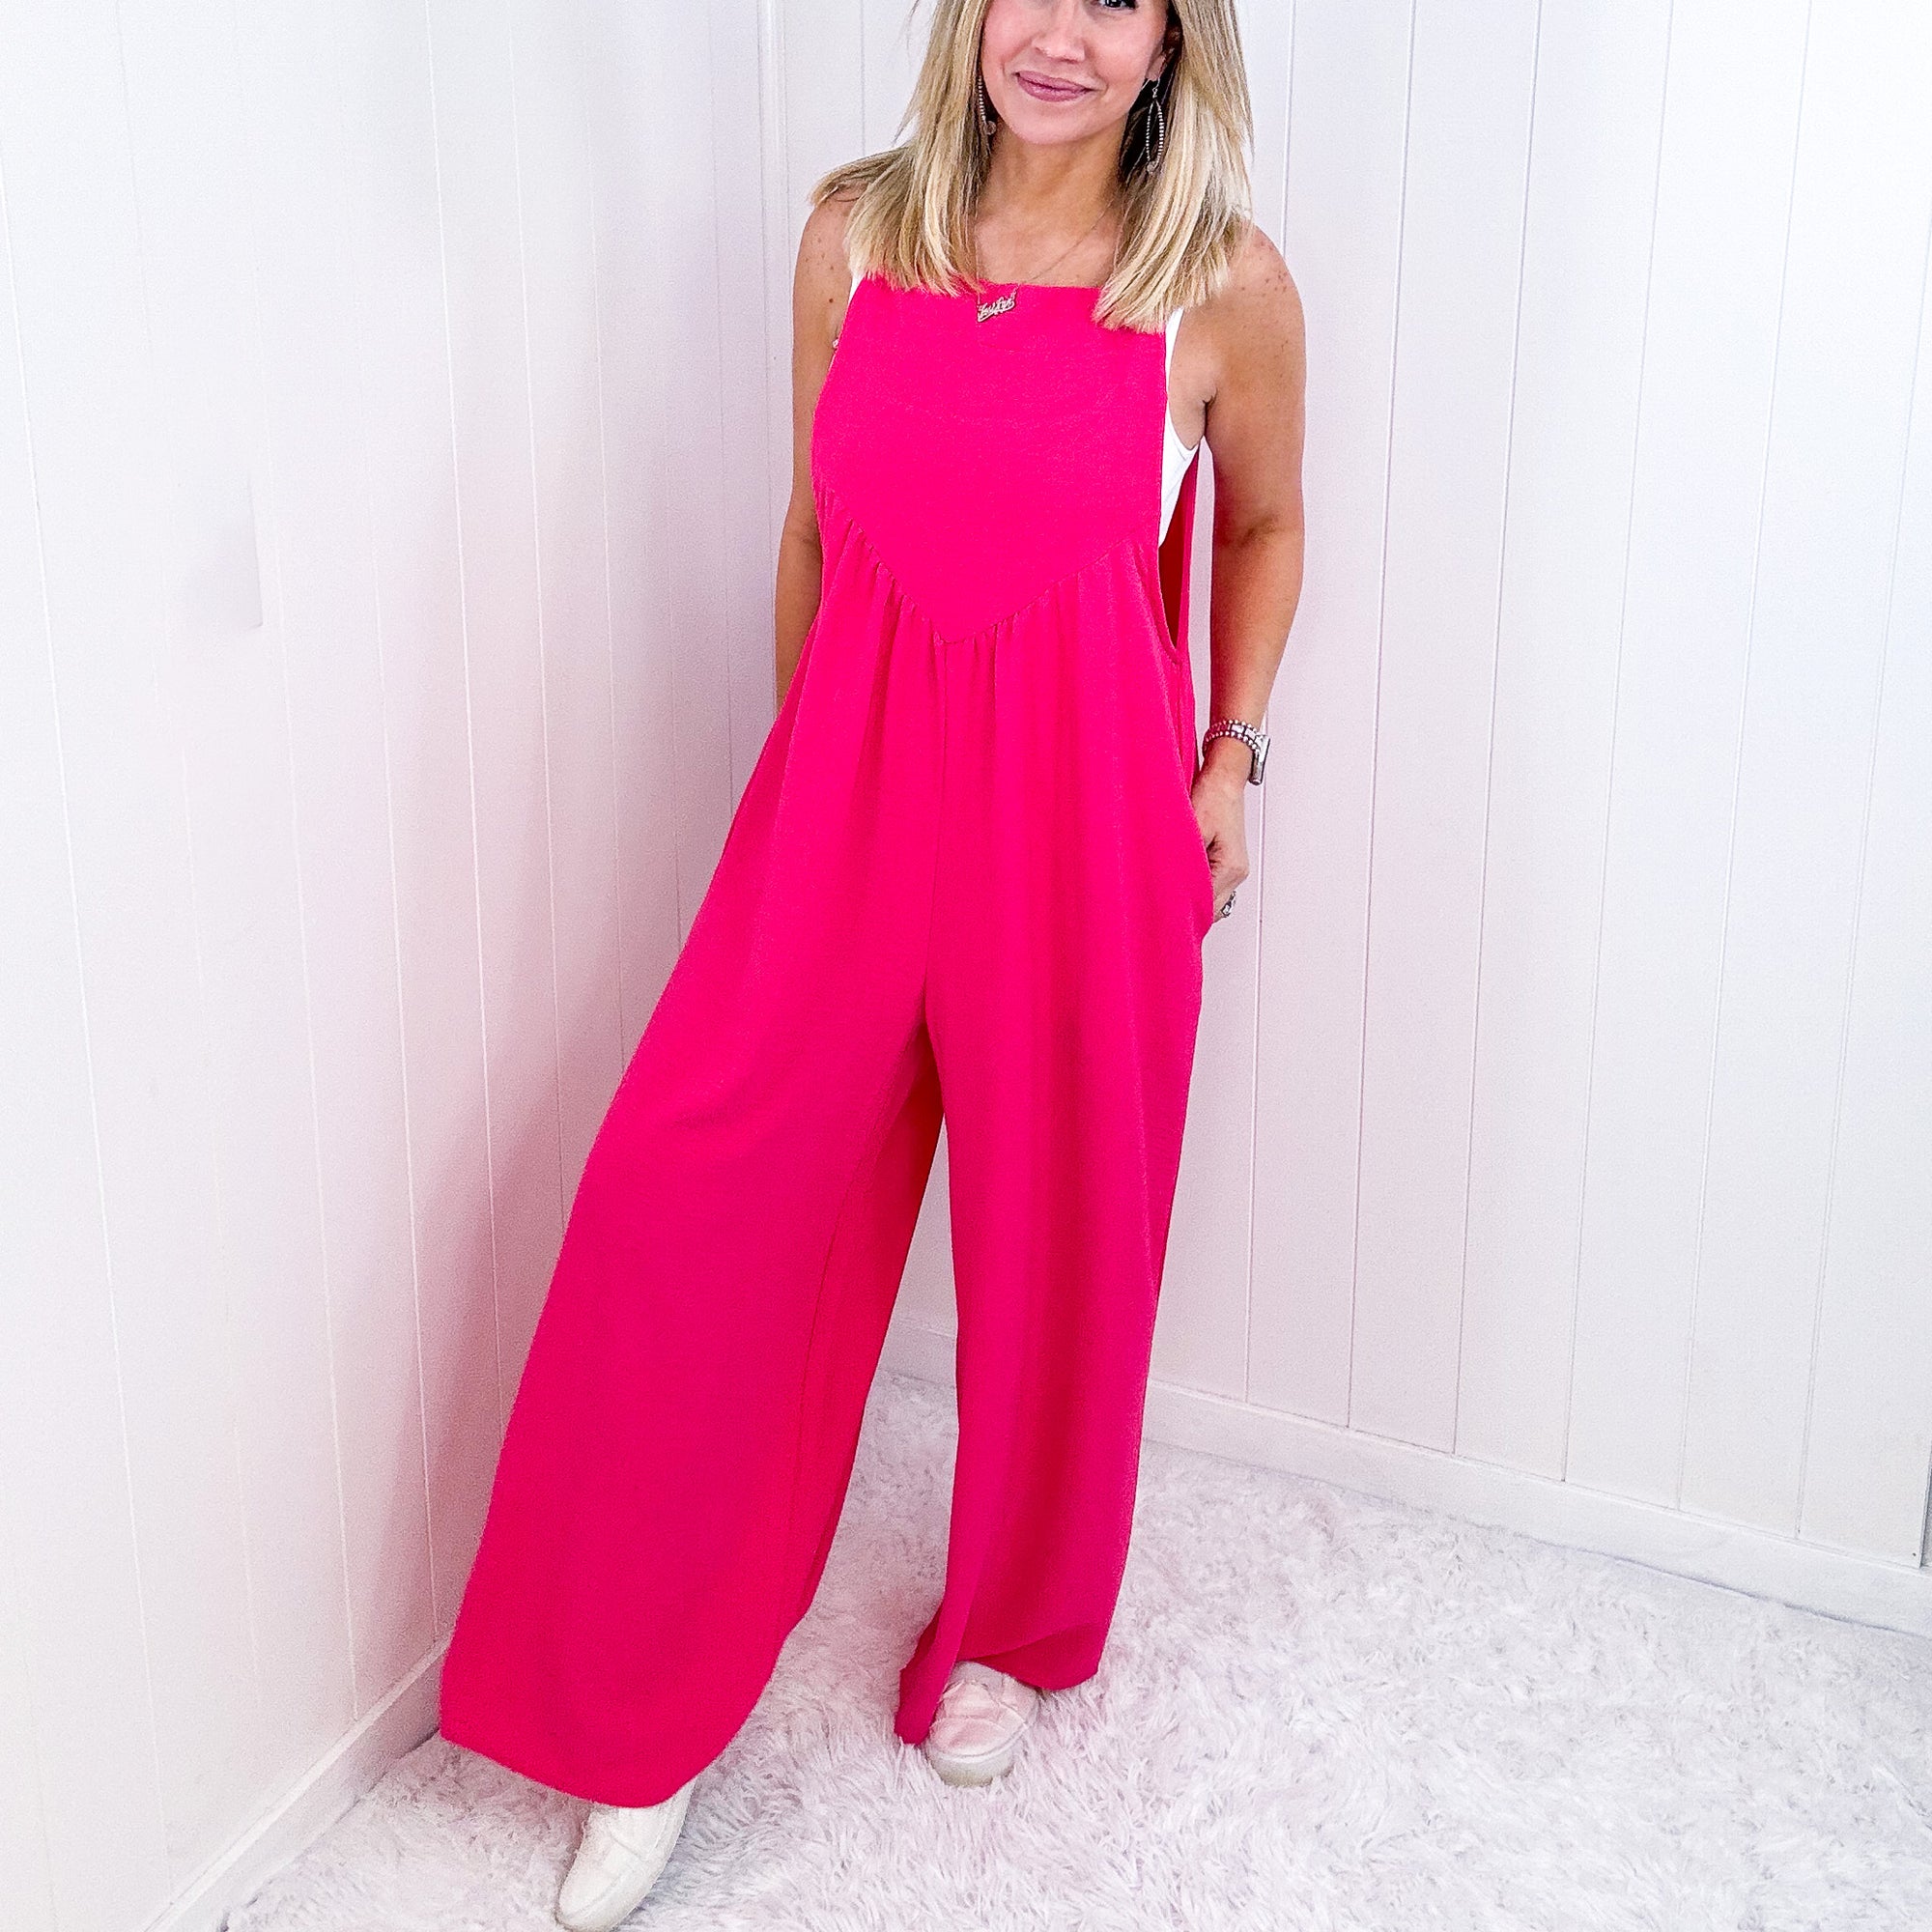 Summer Dreaming Pink Wide Leg Suspender Overall Jumpsuit - Boujee Boutique 